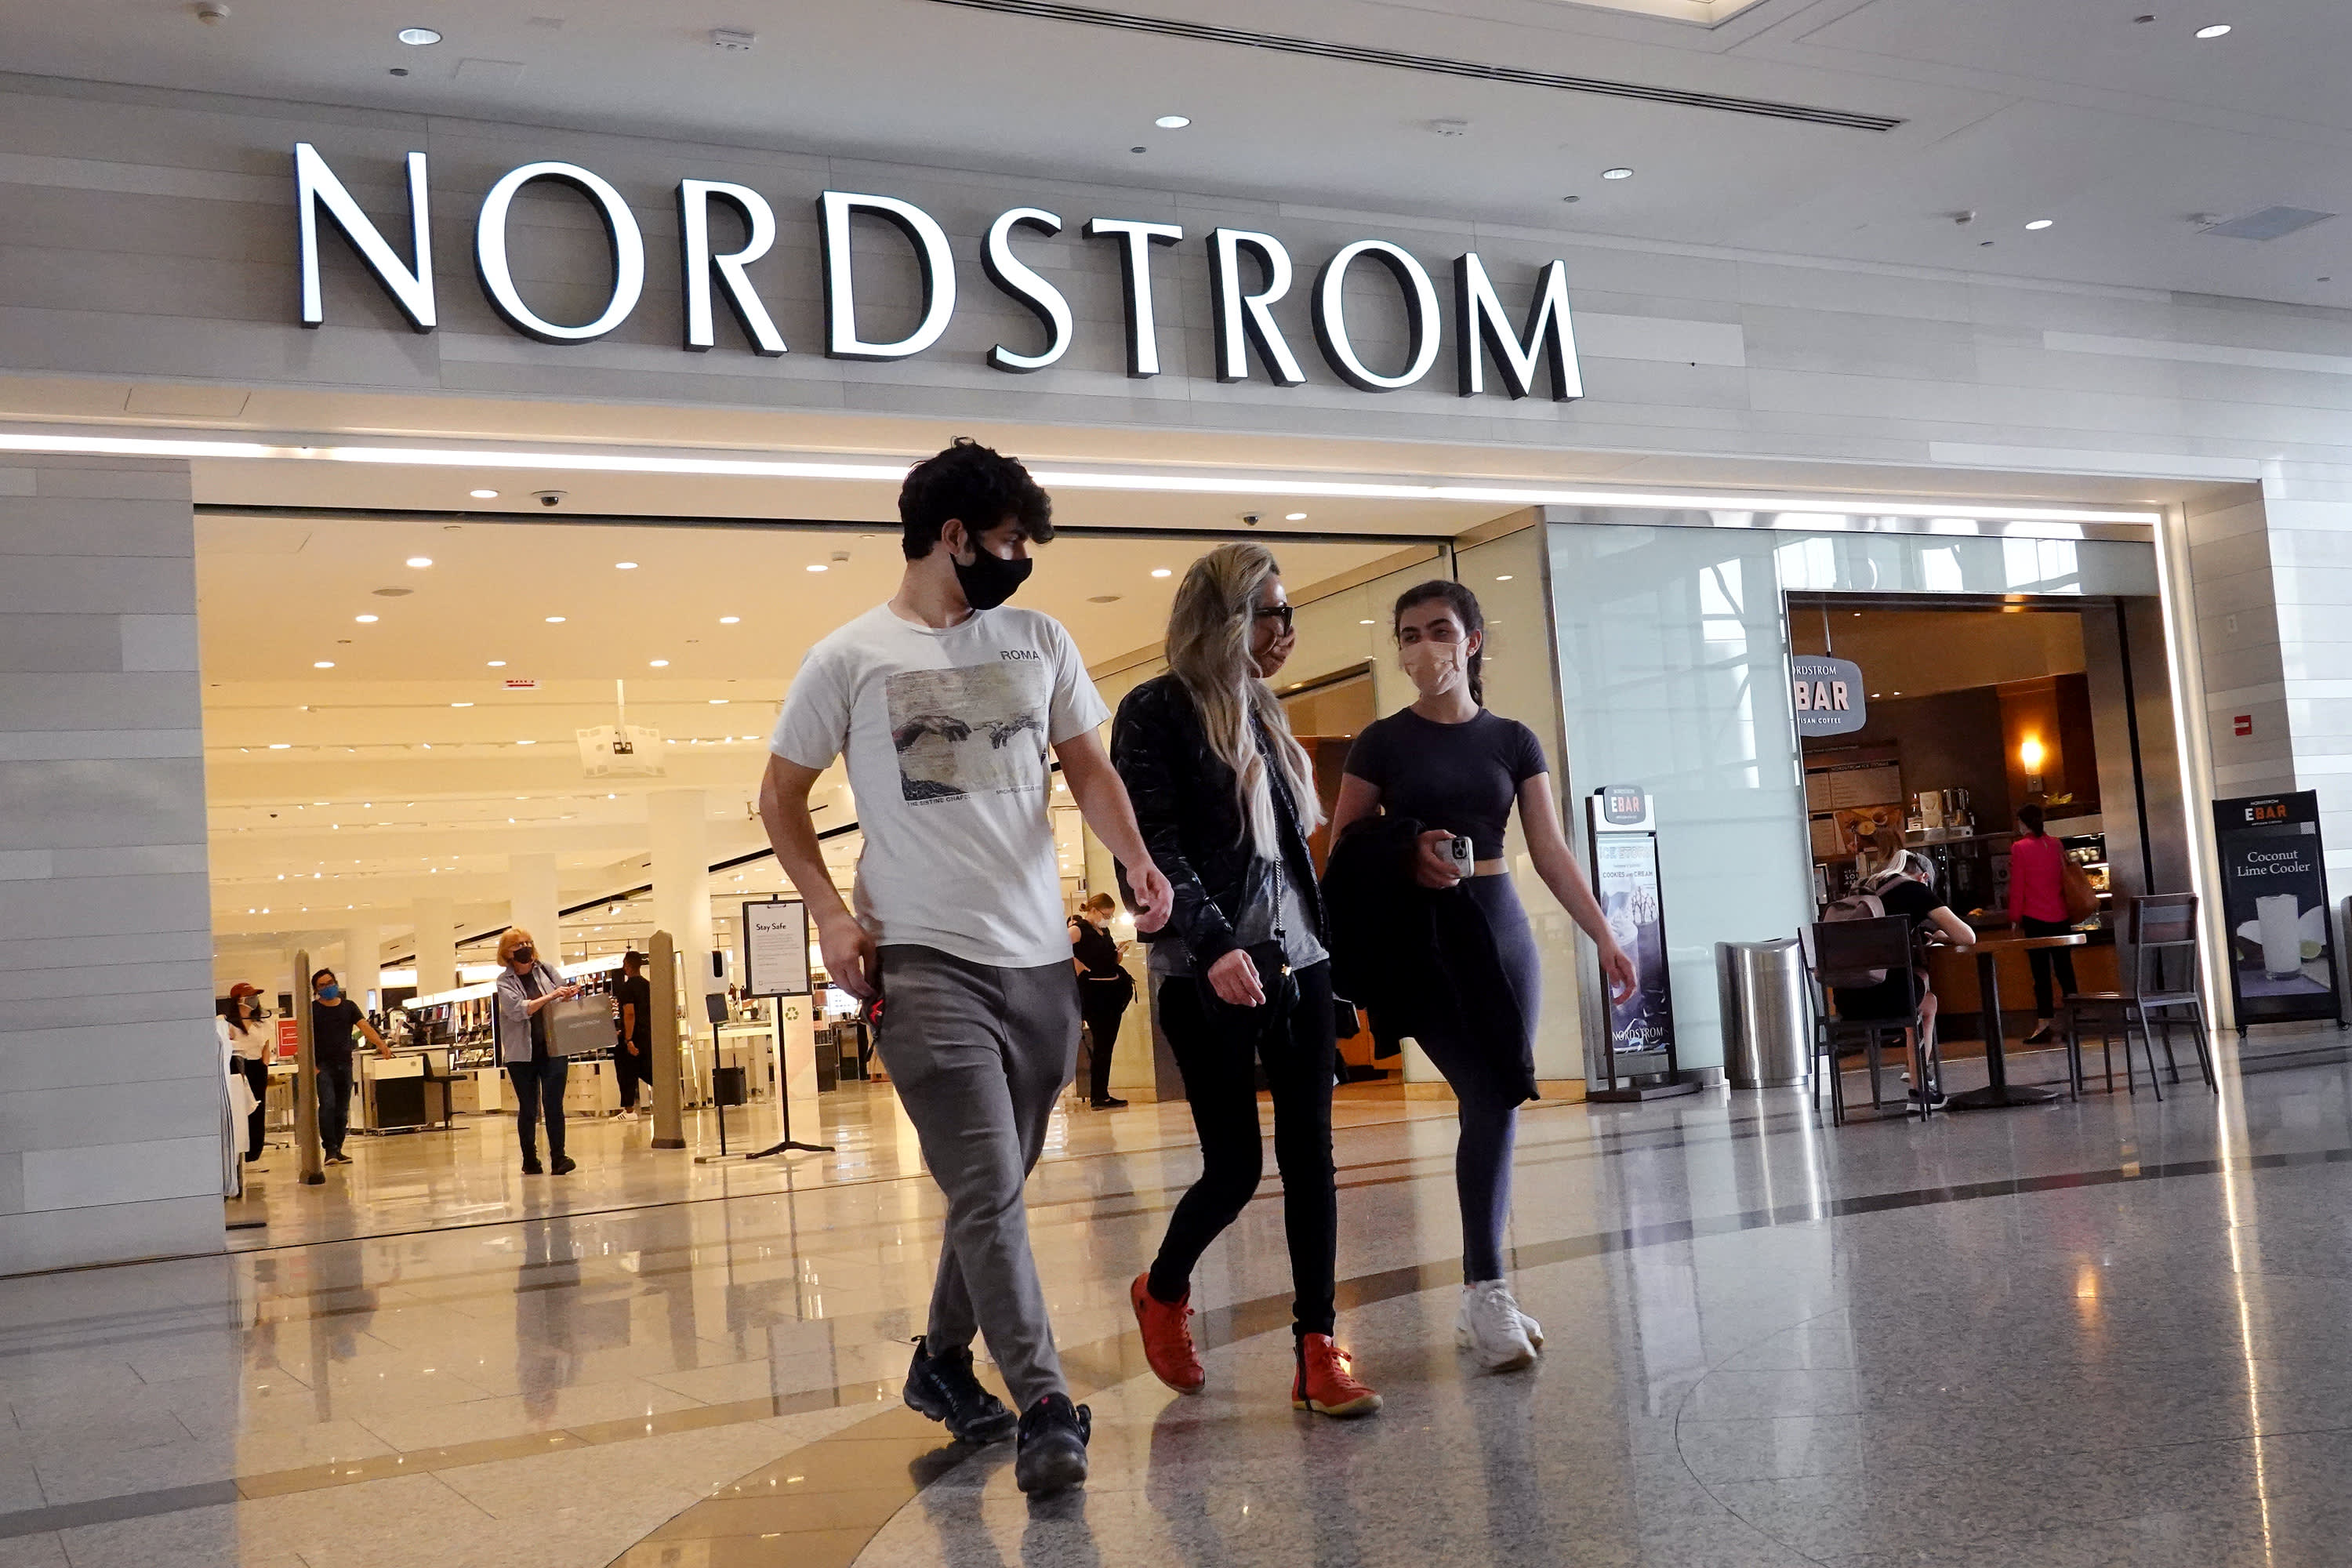 Shares of Nordstrom tank after reporting revenue that fell short of 2019 levels